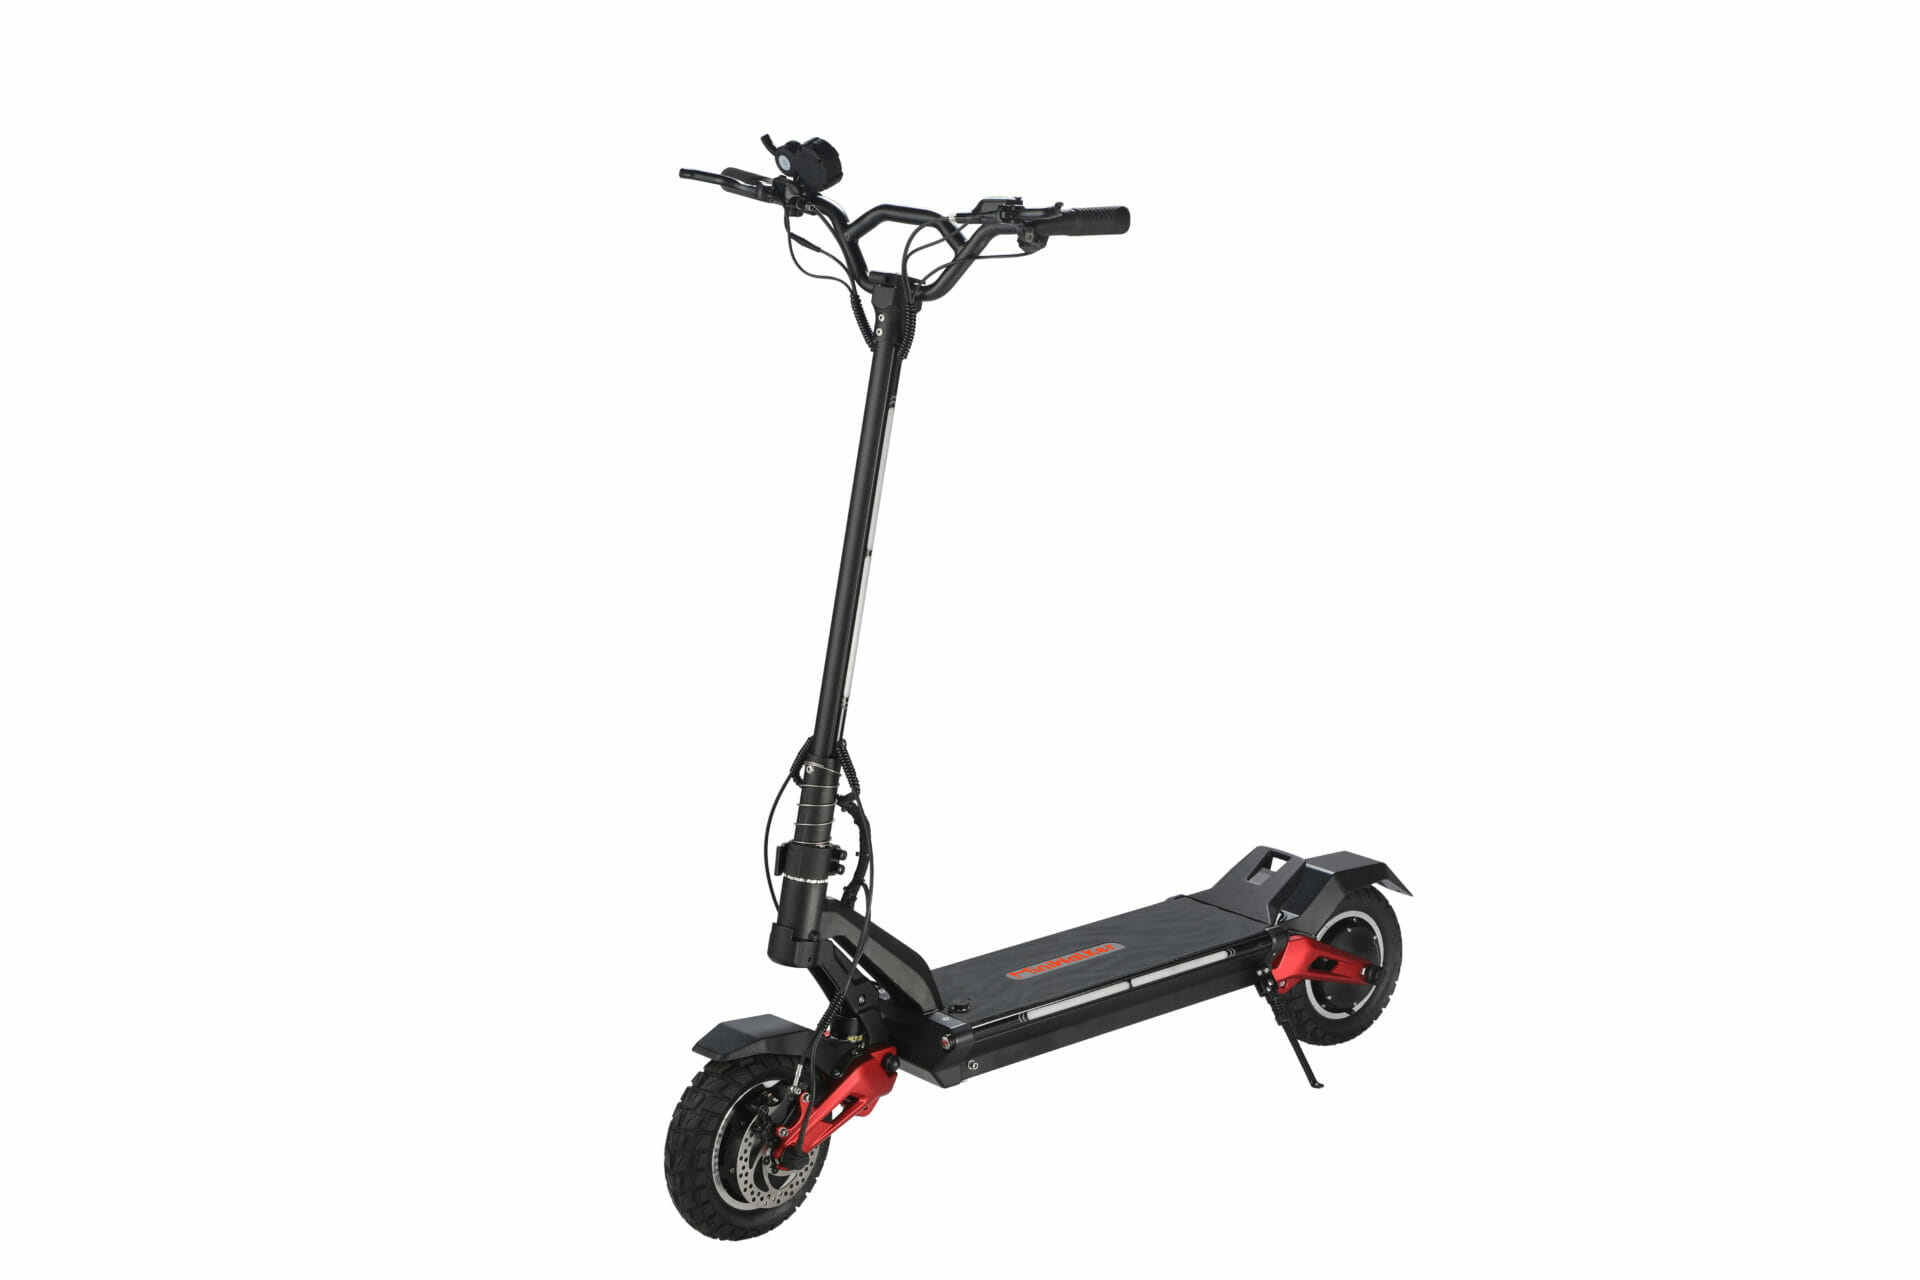 Miniwalker Tiger 10 Pro e-Scooter - Dual Motor Electric Scooter